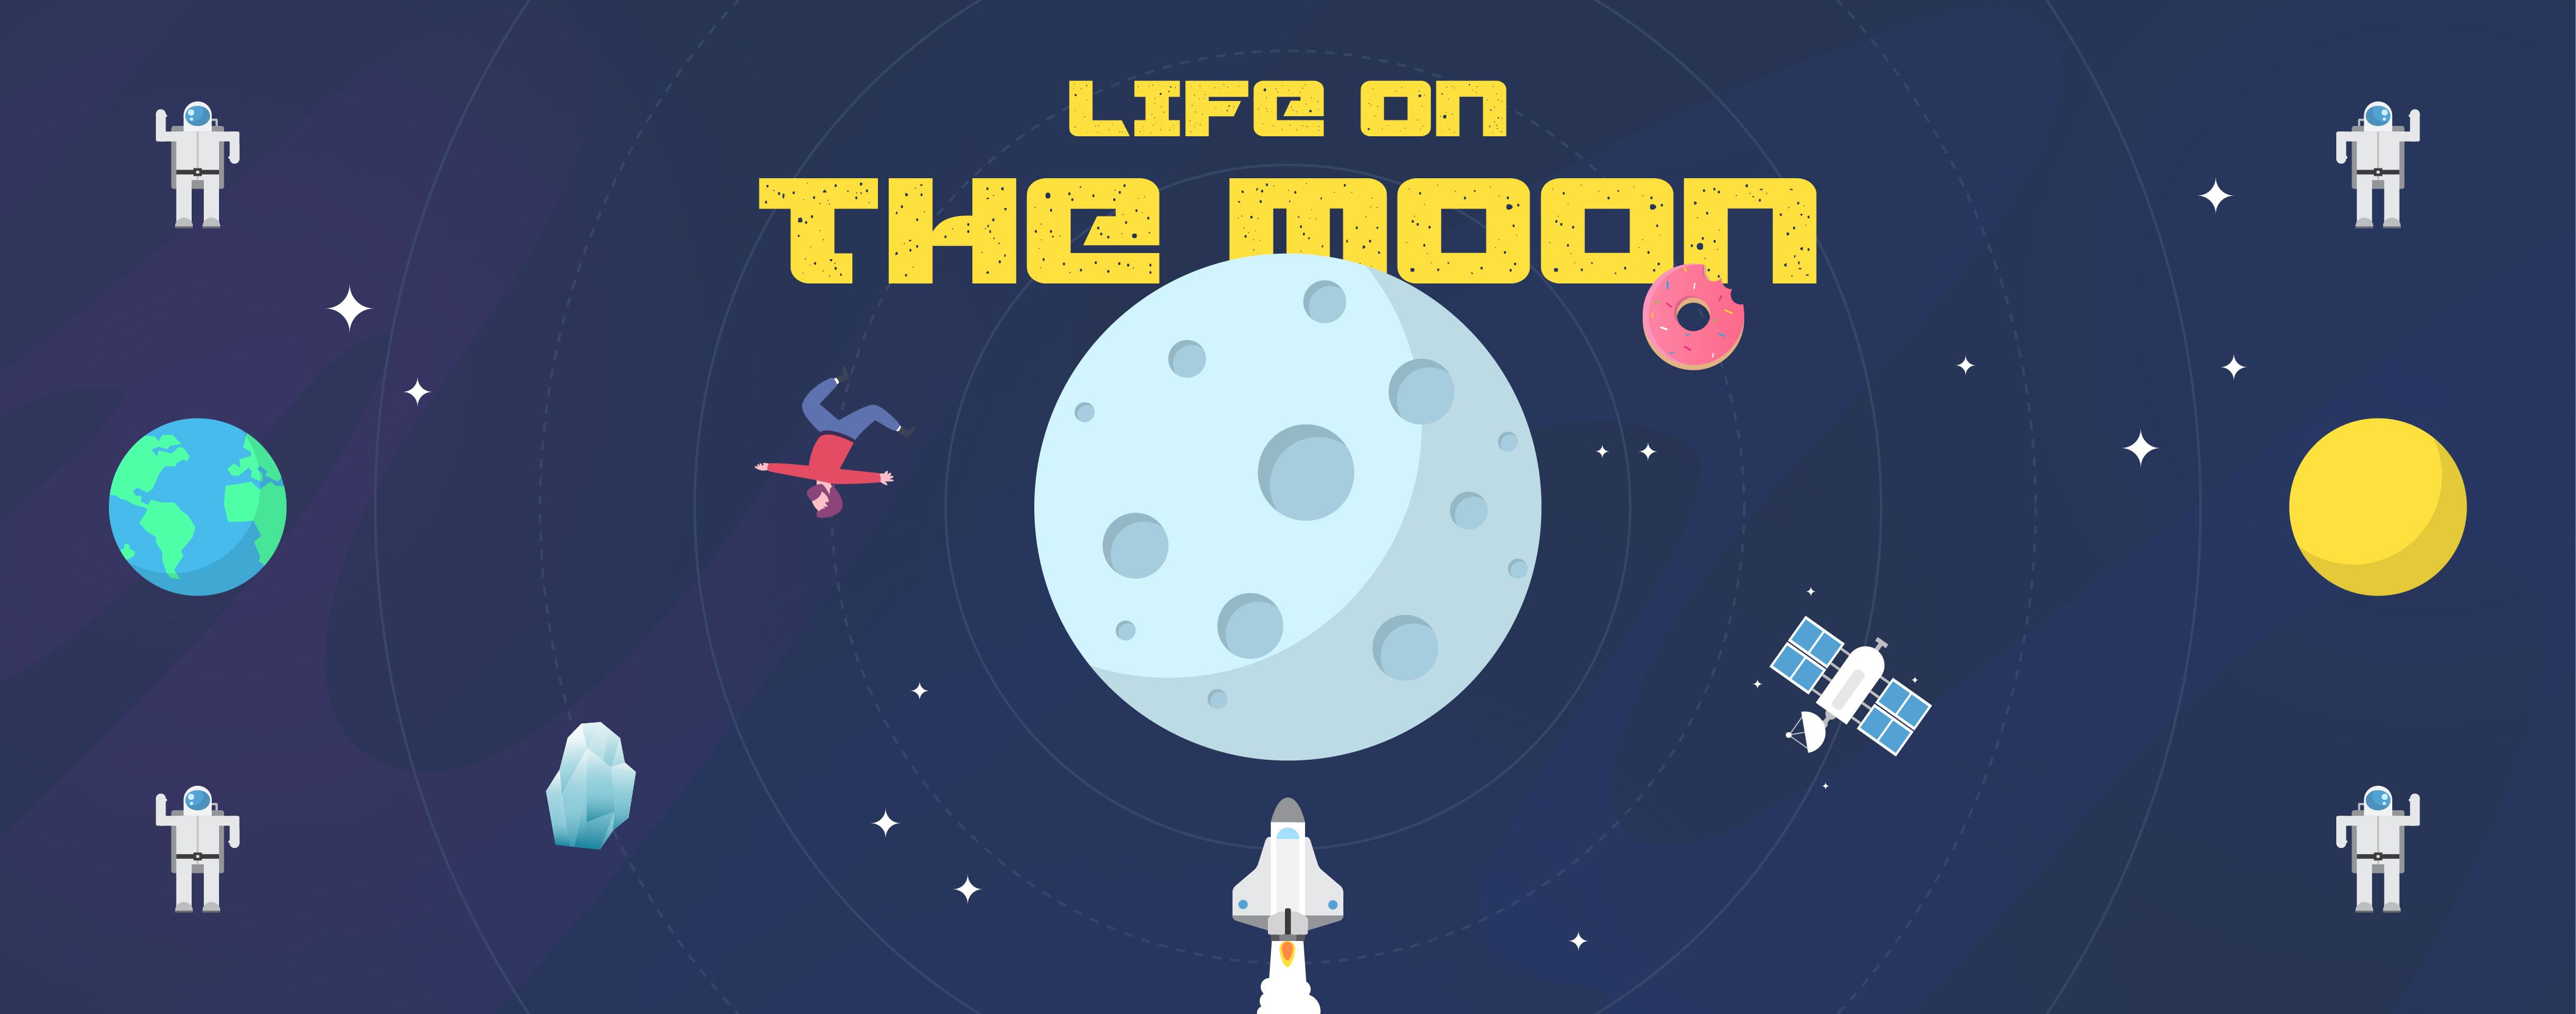 Lunar living: What would life on the Moon be like?